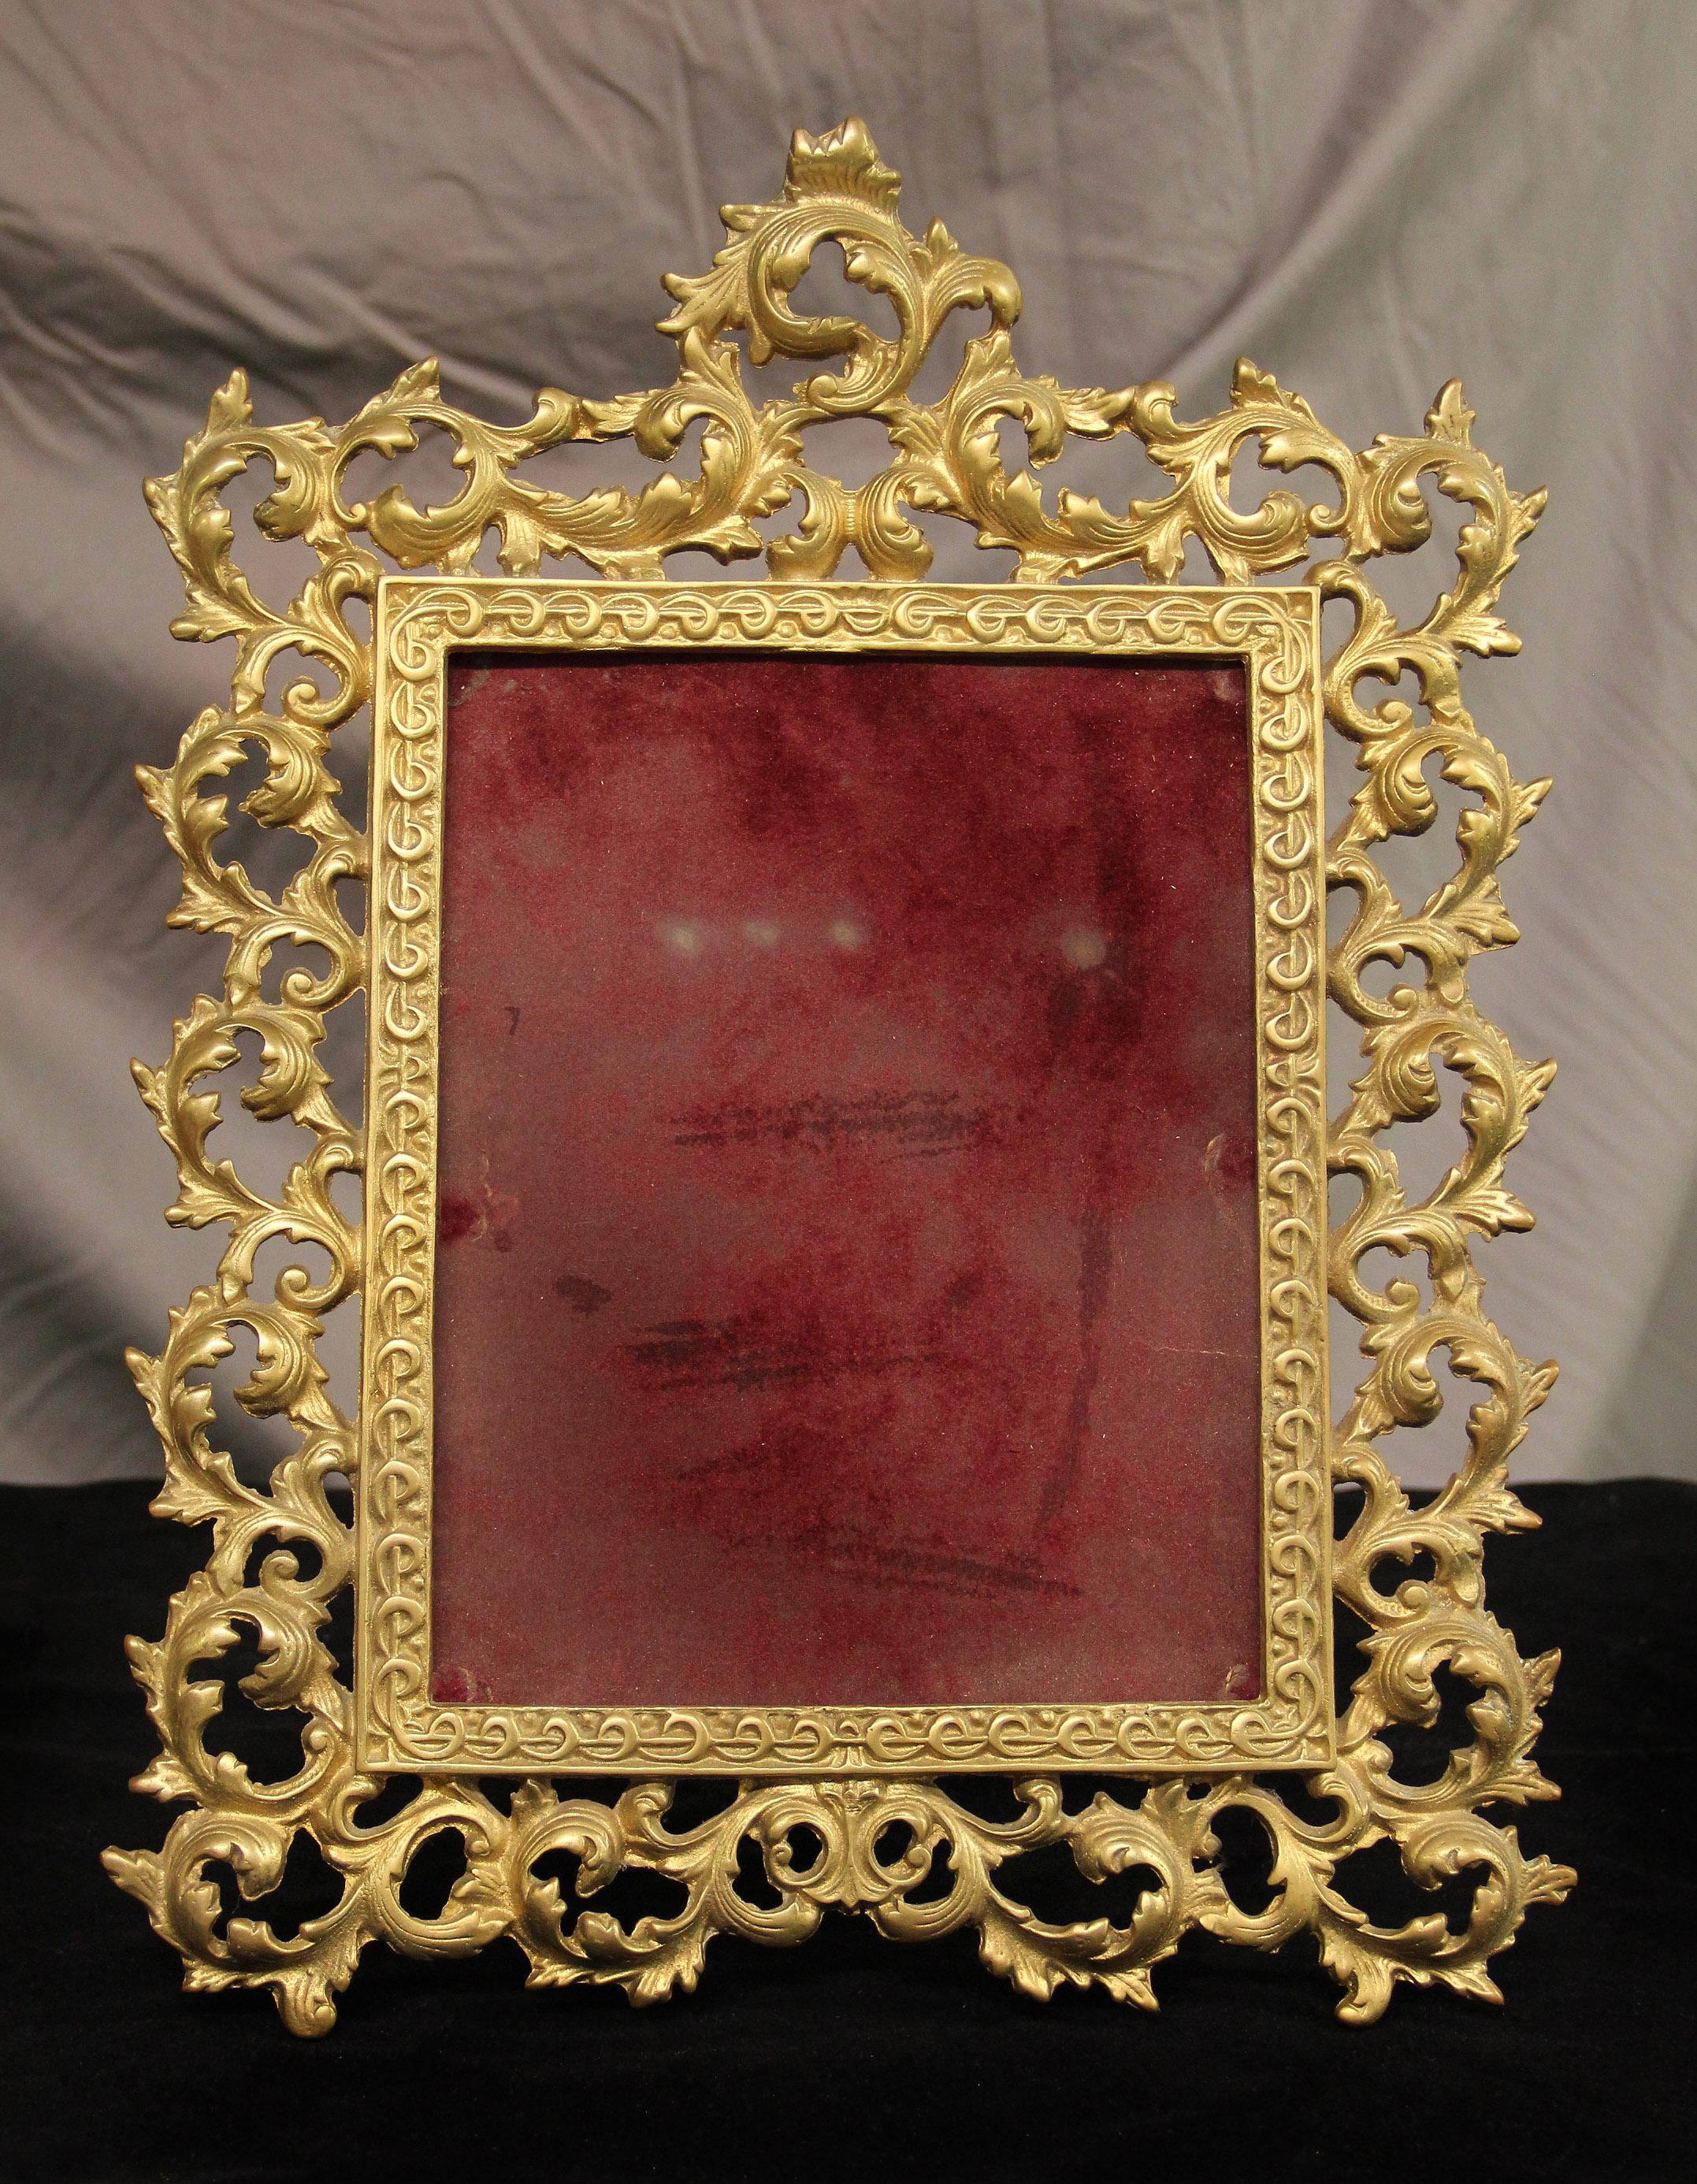 A nice pair of early 20th century gilt bronze picture frames

In beautiful Rococo style.